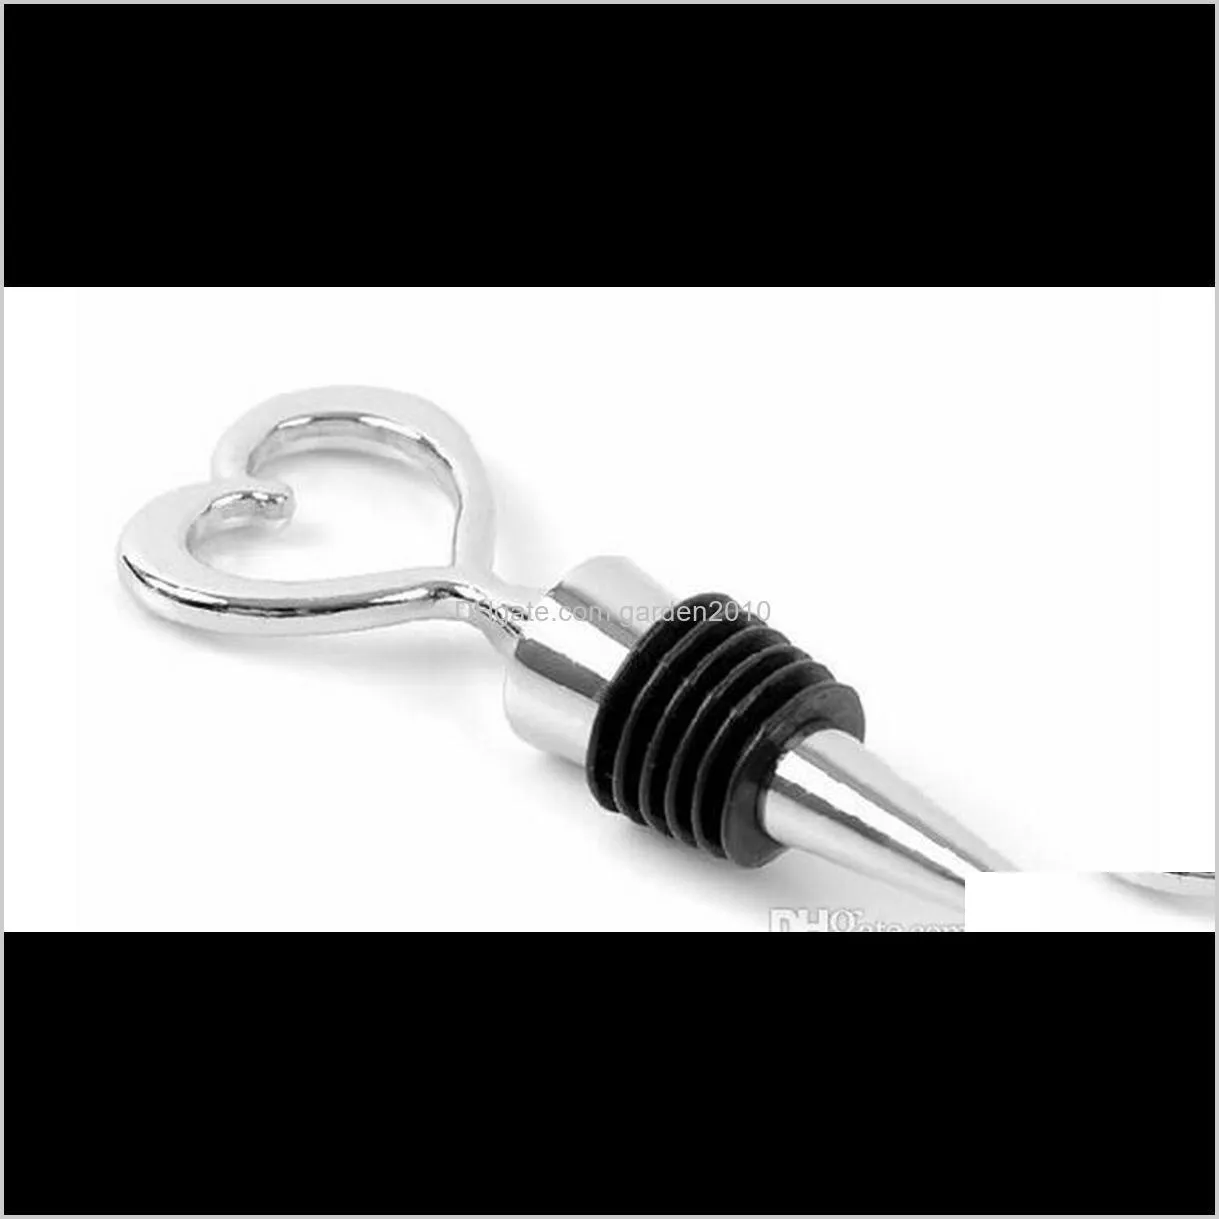 heart shaped wine bottle stopper twist wedding favor gifts new arrival wine bottle stopper bar tools silver color with retail package